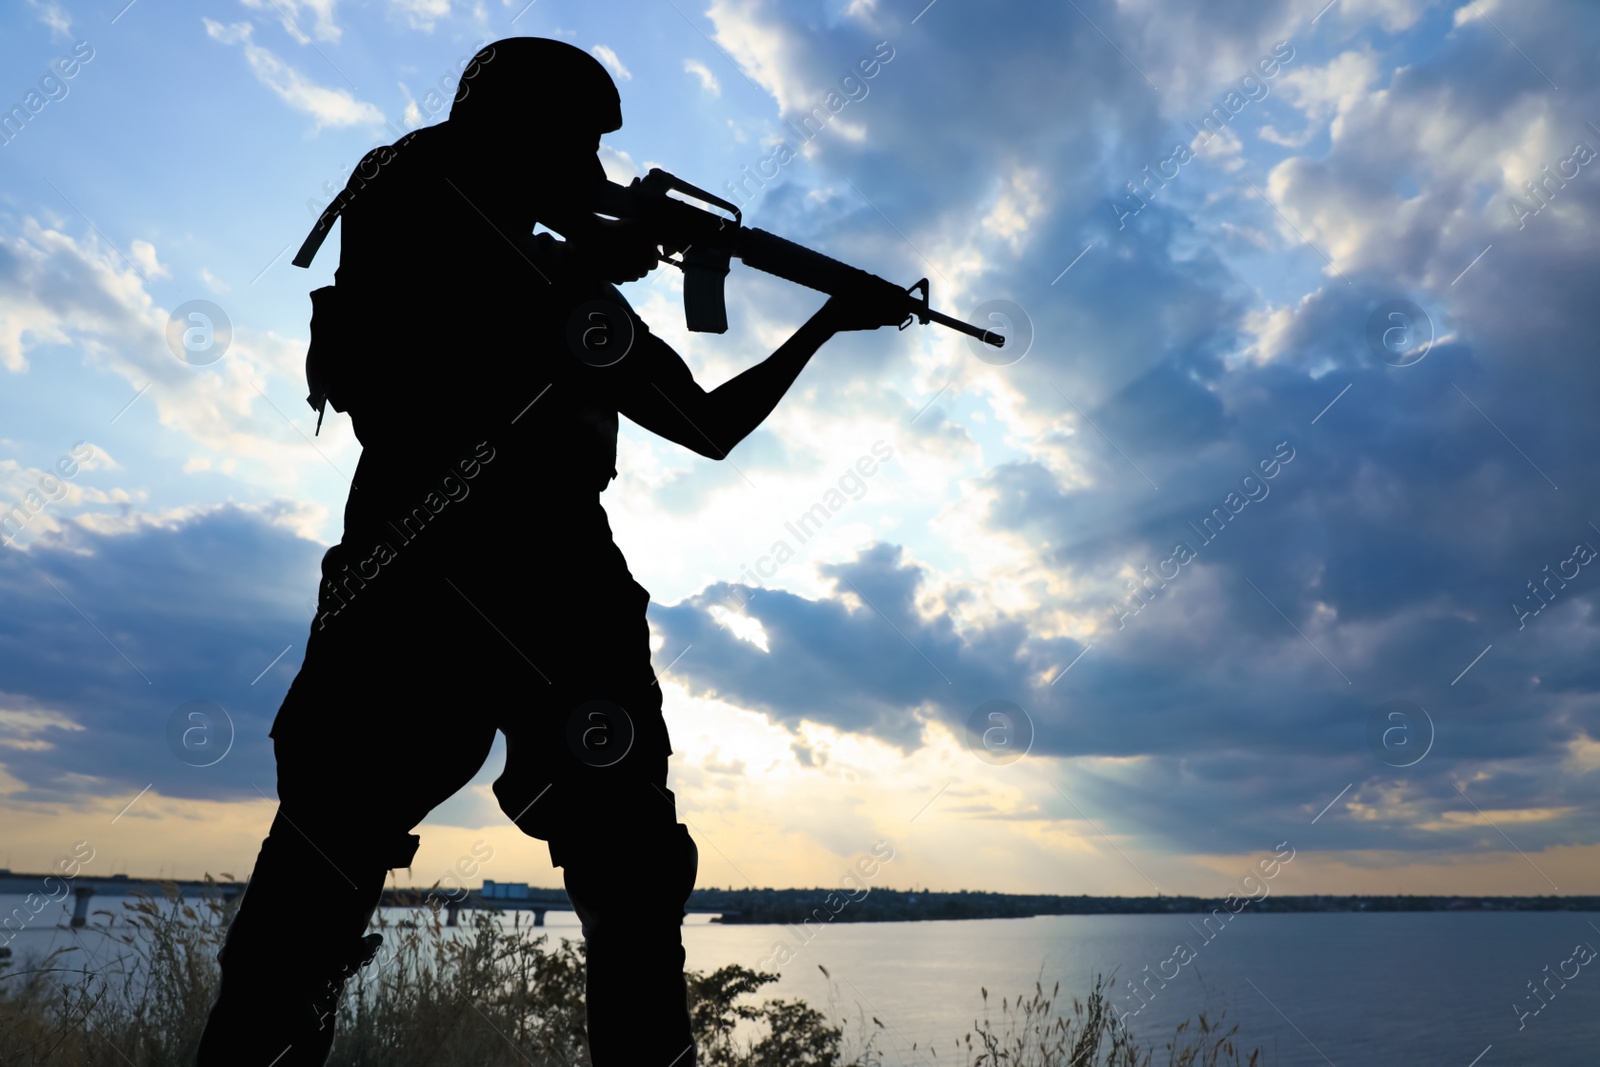 Photo of Soldier with machine gun patrolling outdoors. Military service